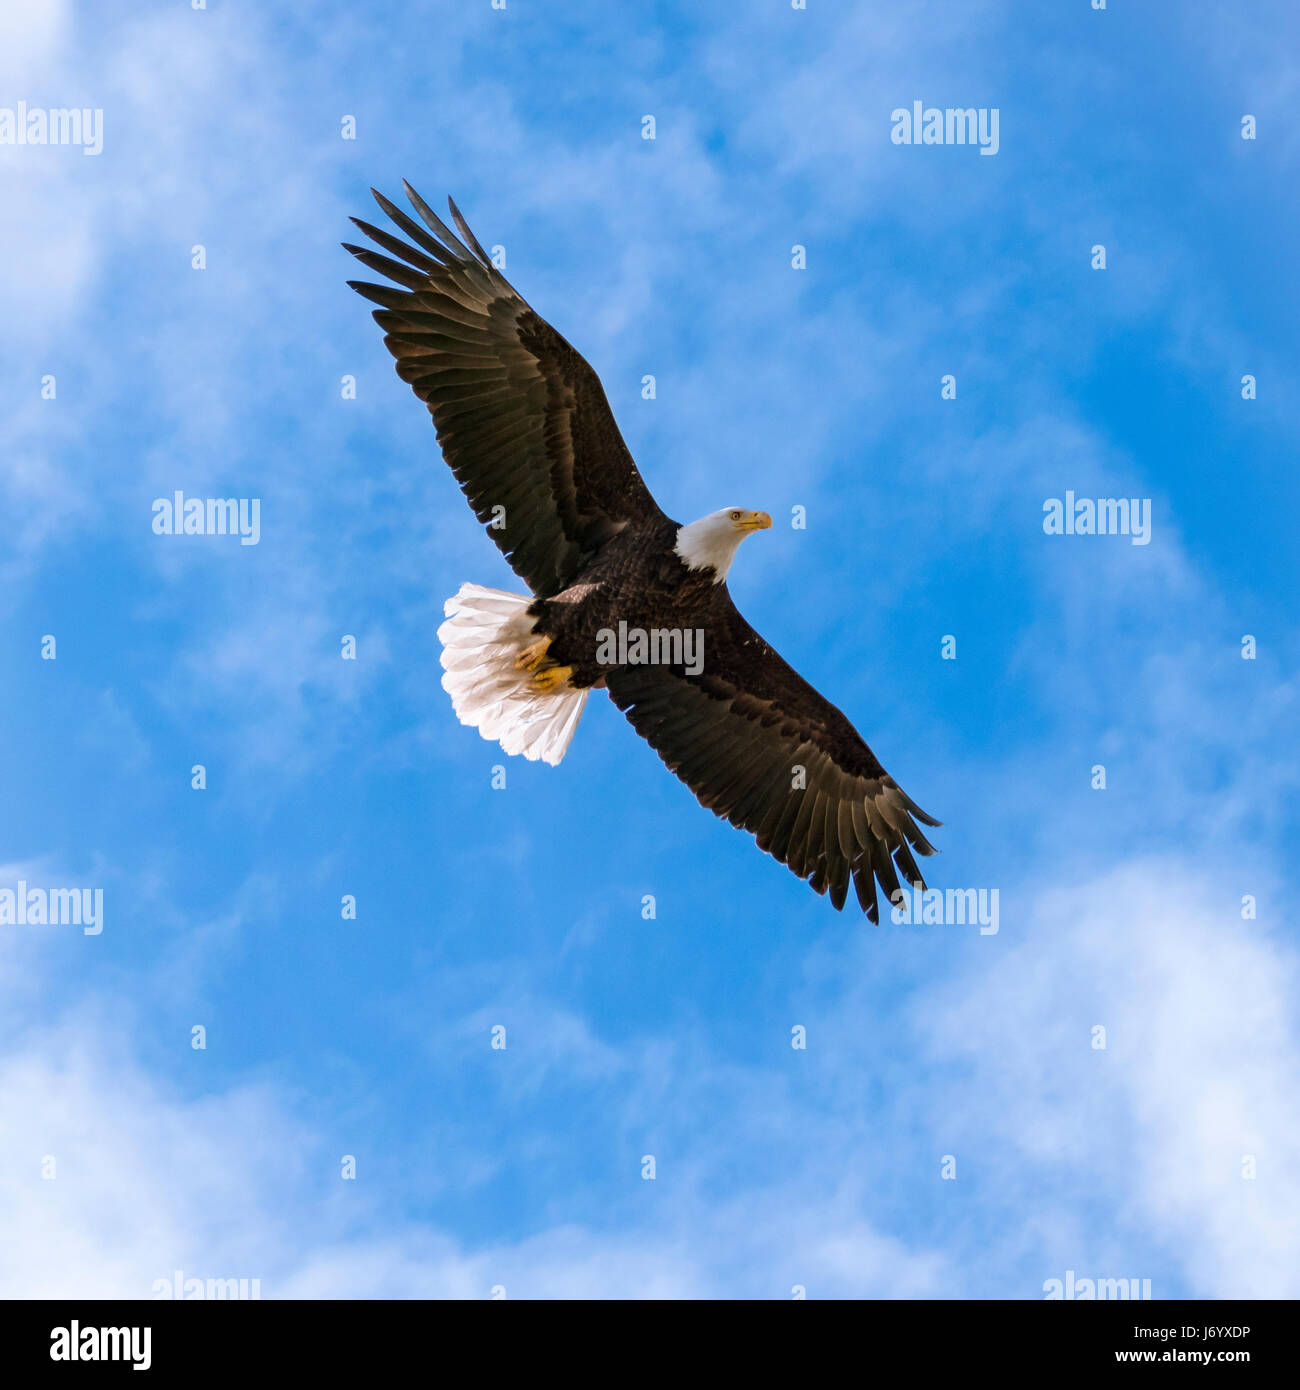 American iconic symbol bird flying high soaring blue skies with massive wing span Stock Photo